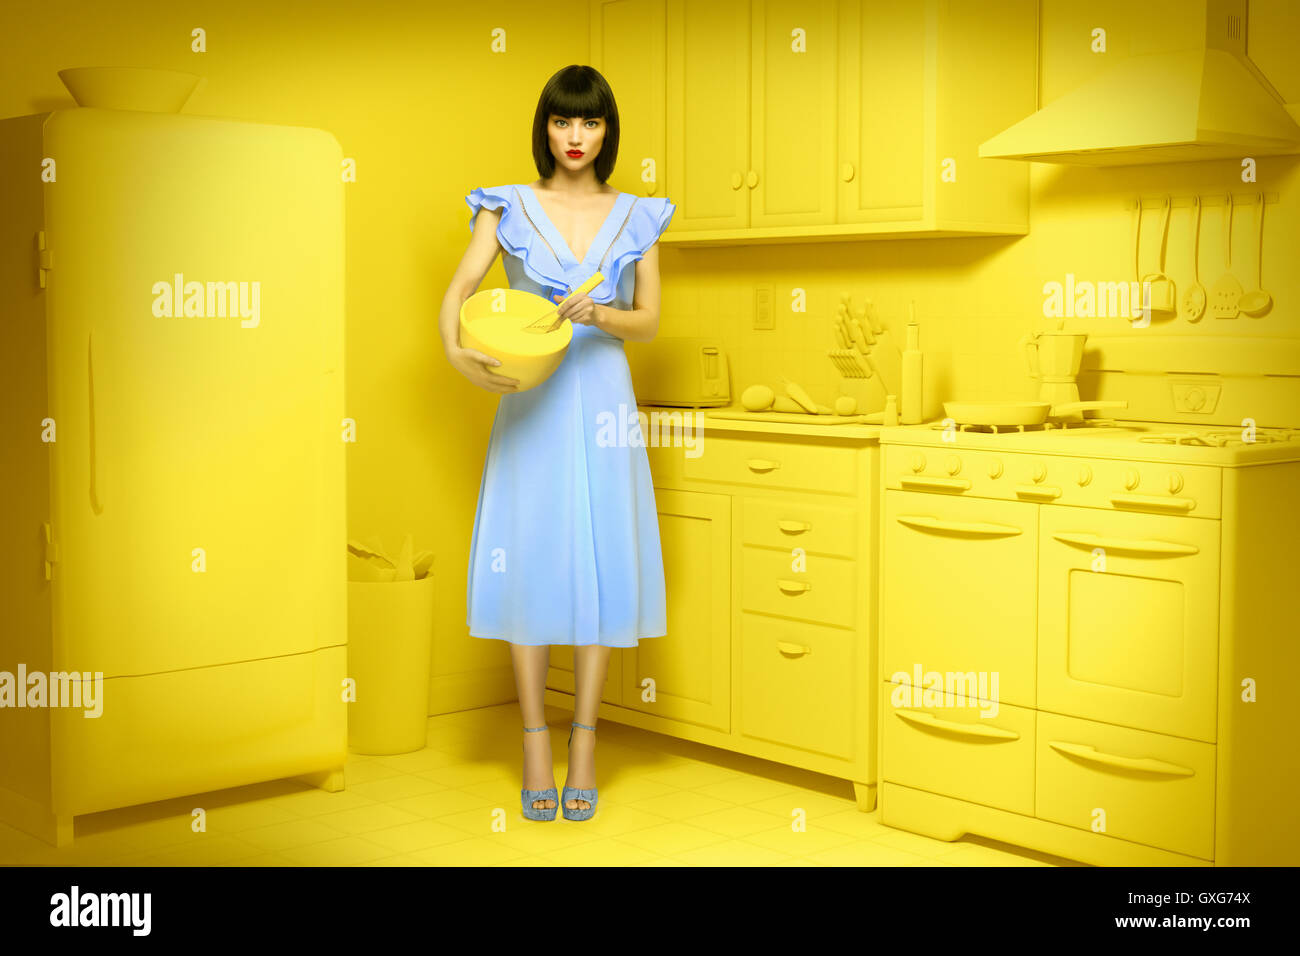 Caucasian woman in yellow old-fashioned kitchen holding mixing bowl Stock Photo